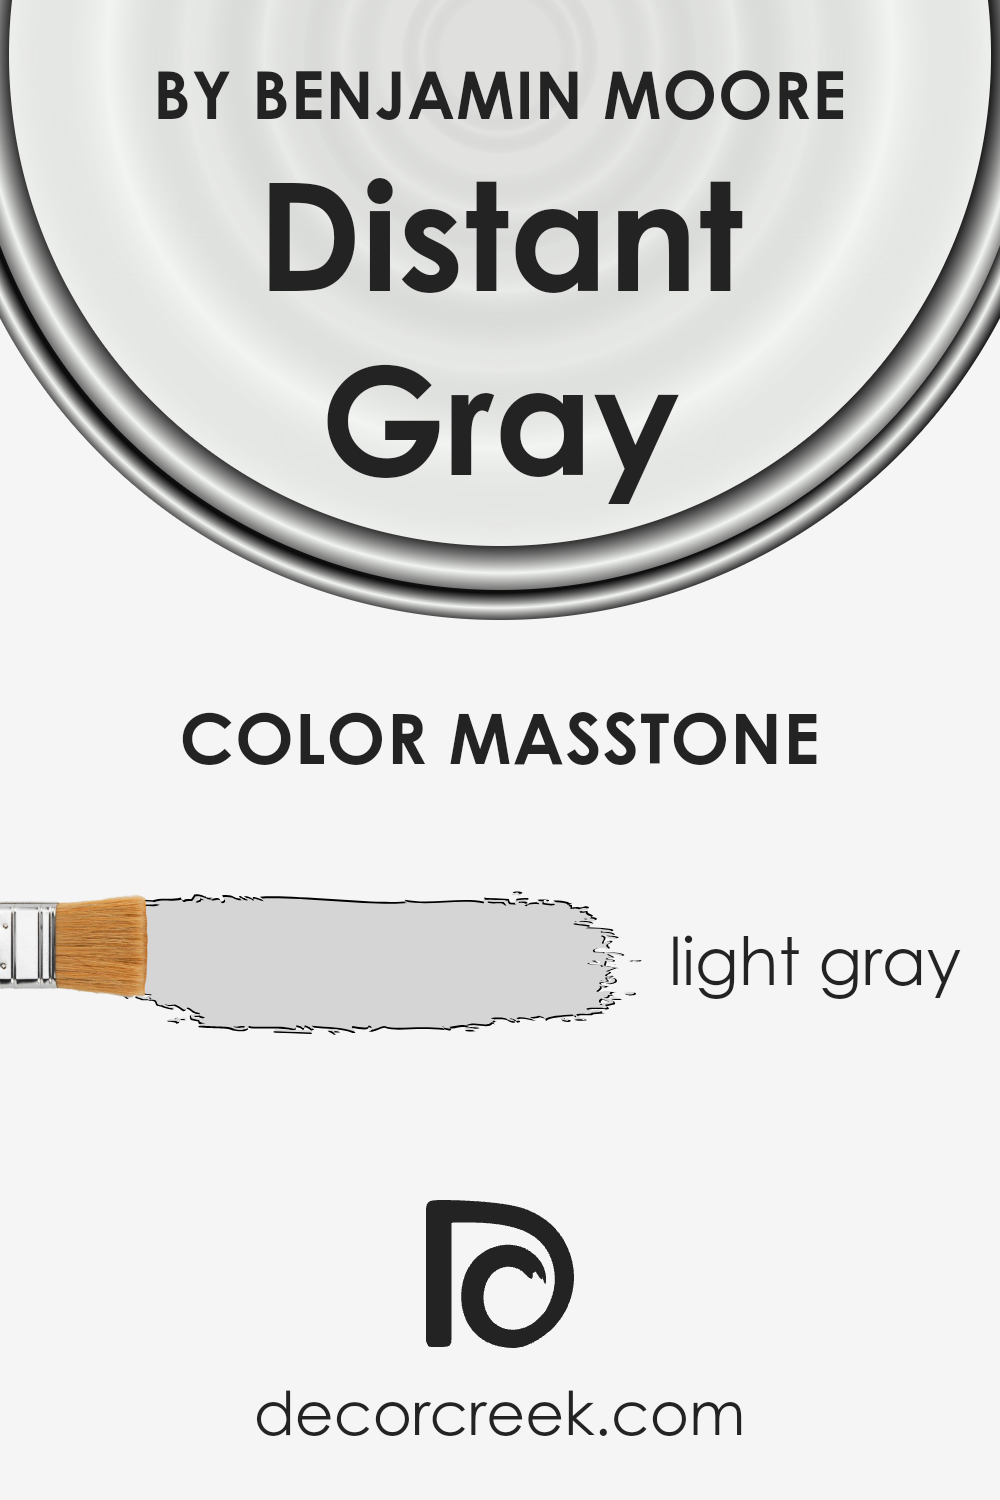 what_is_the_masstone_of_distant_gray_oc_68